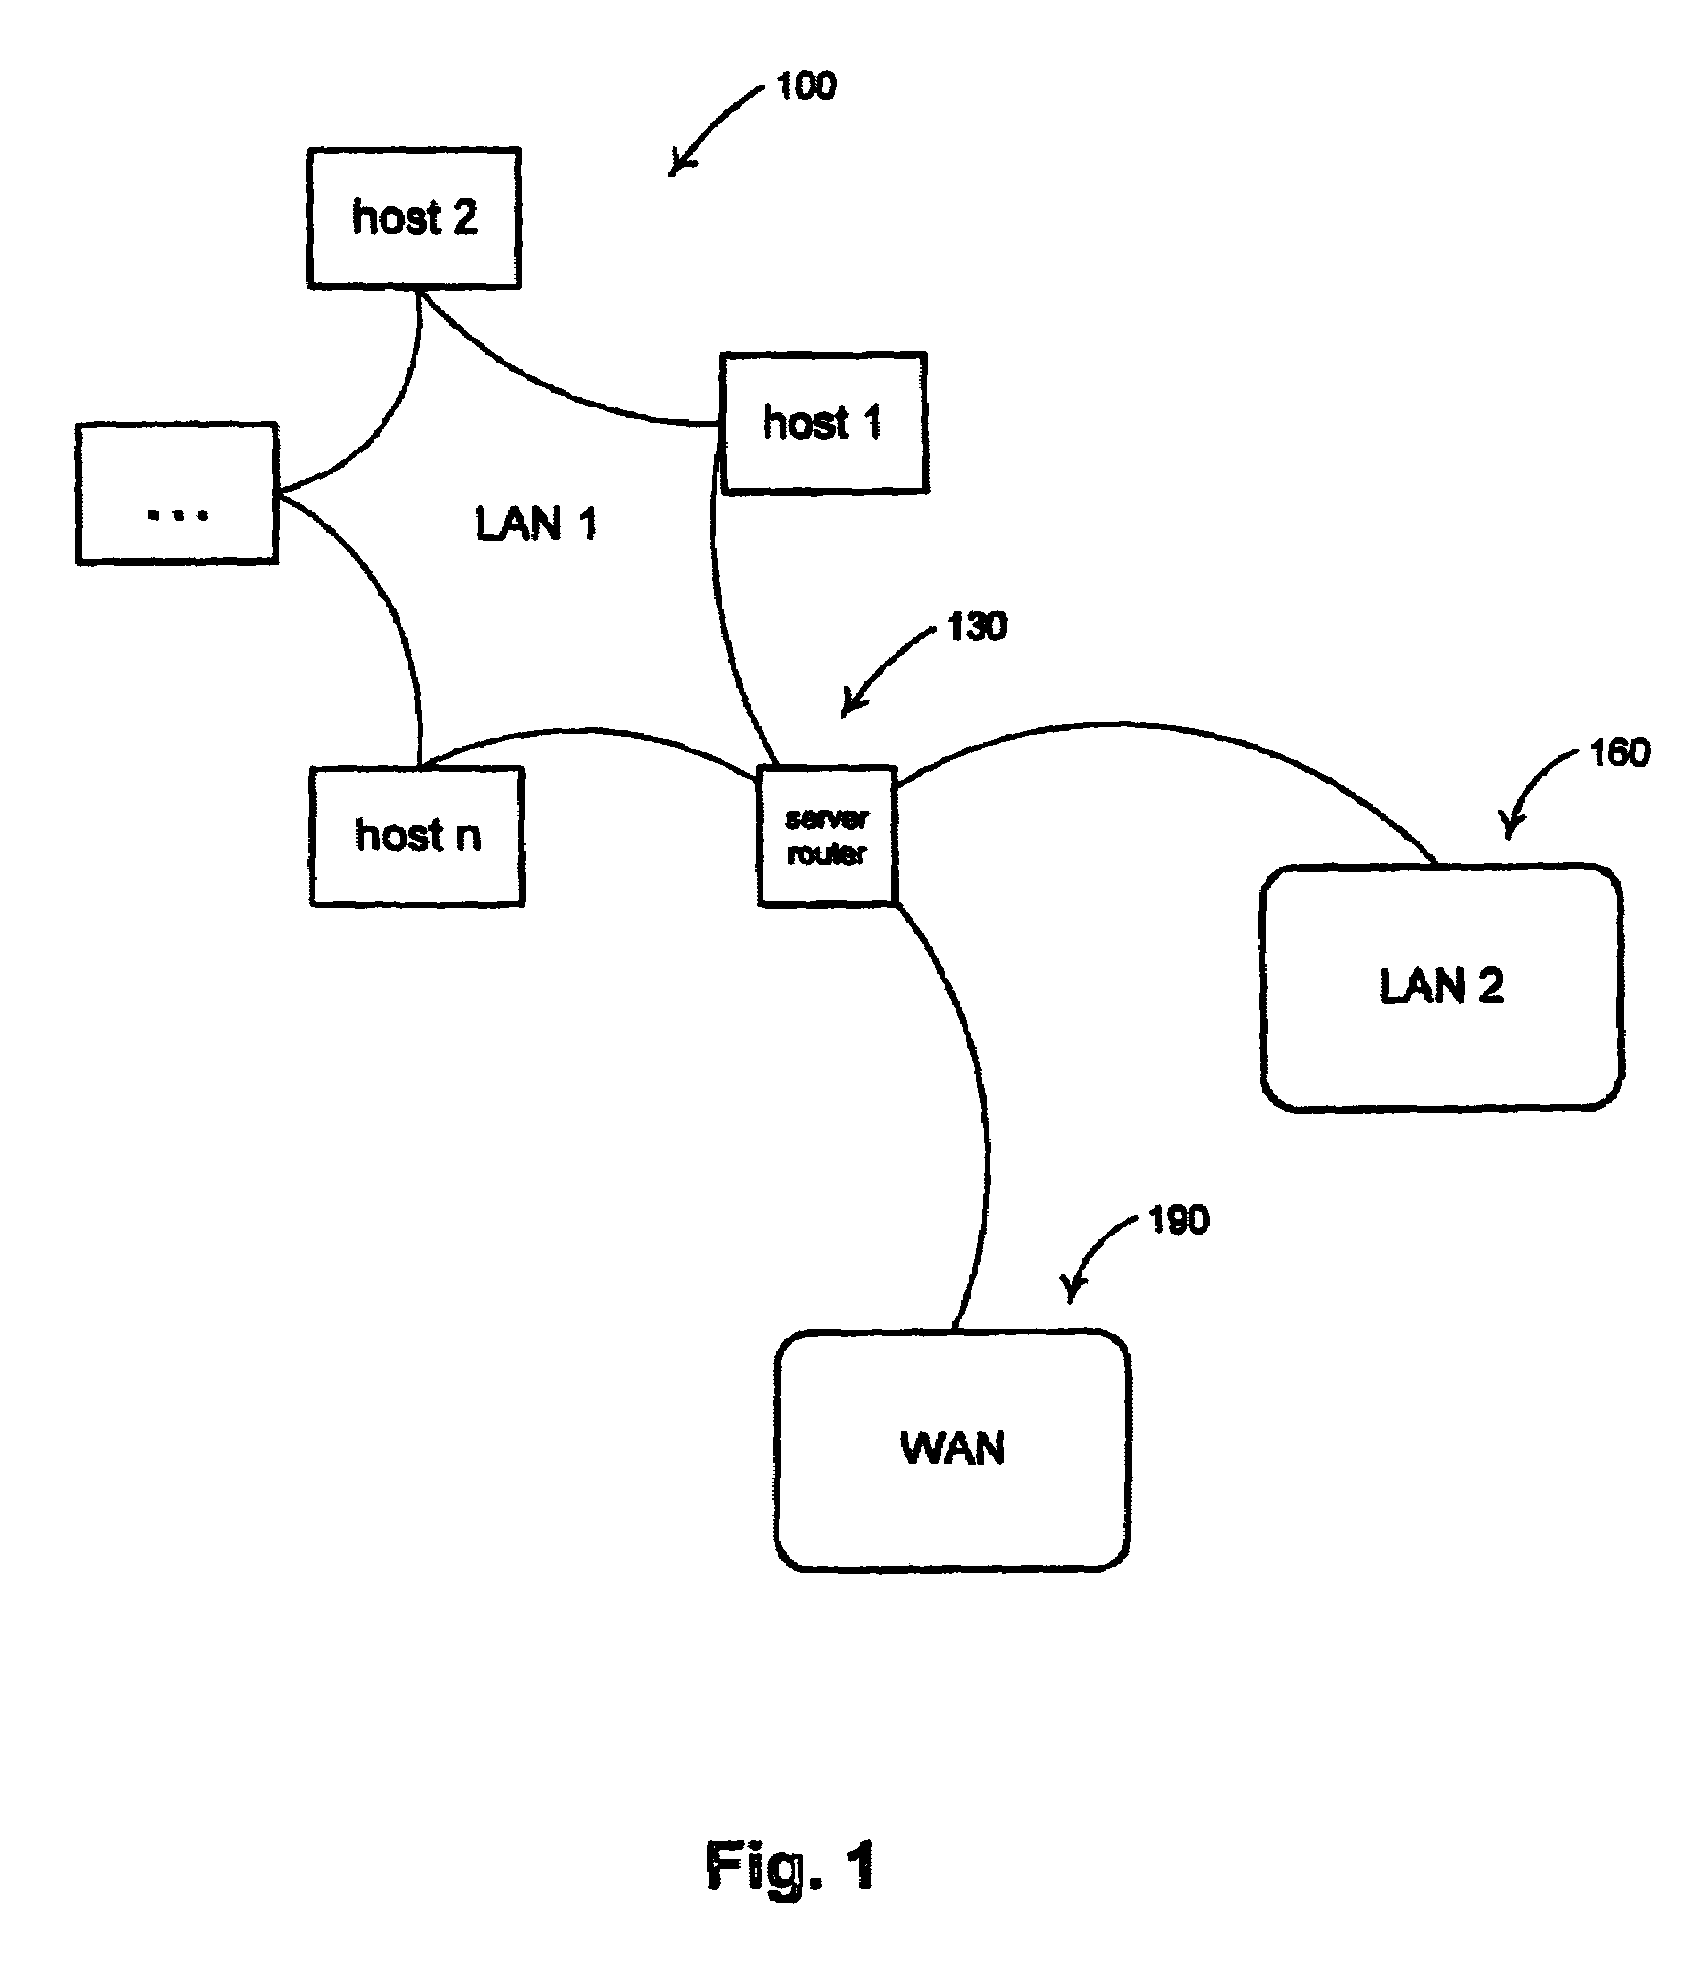 Method for correlating and presenting network management data